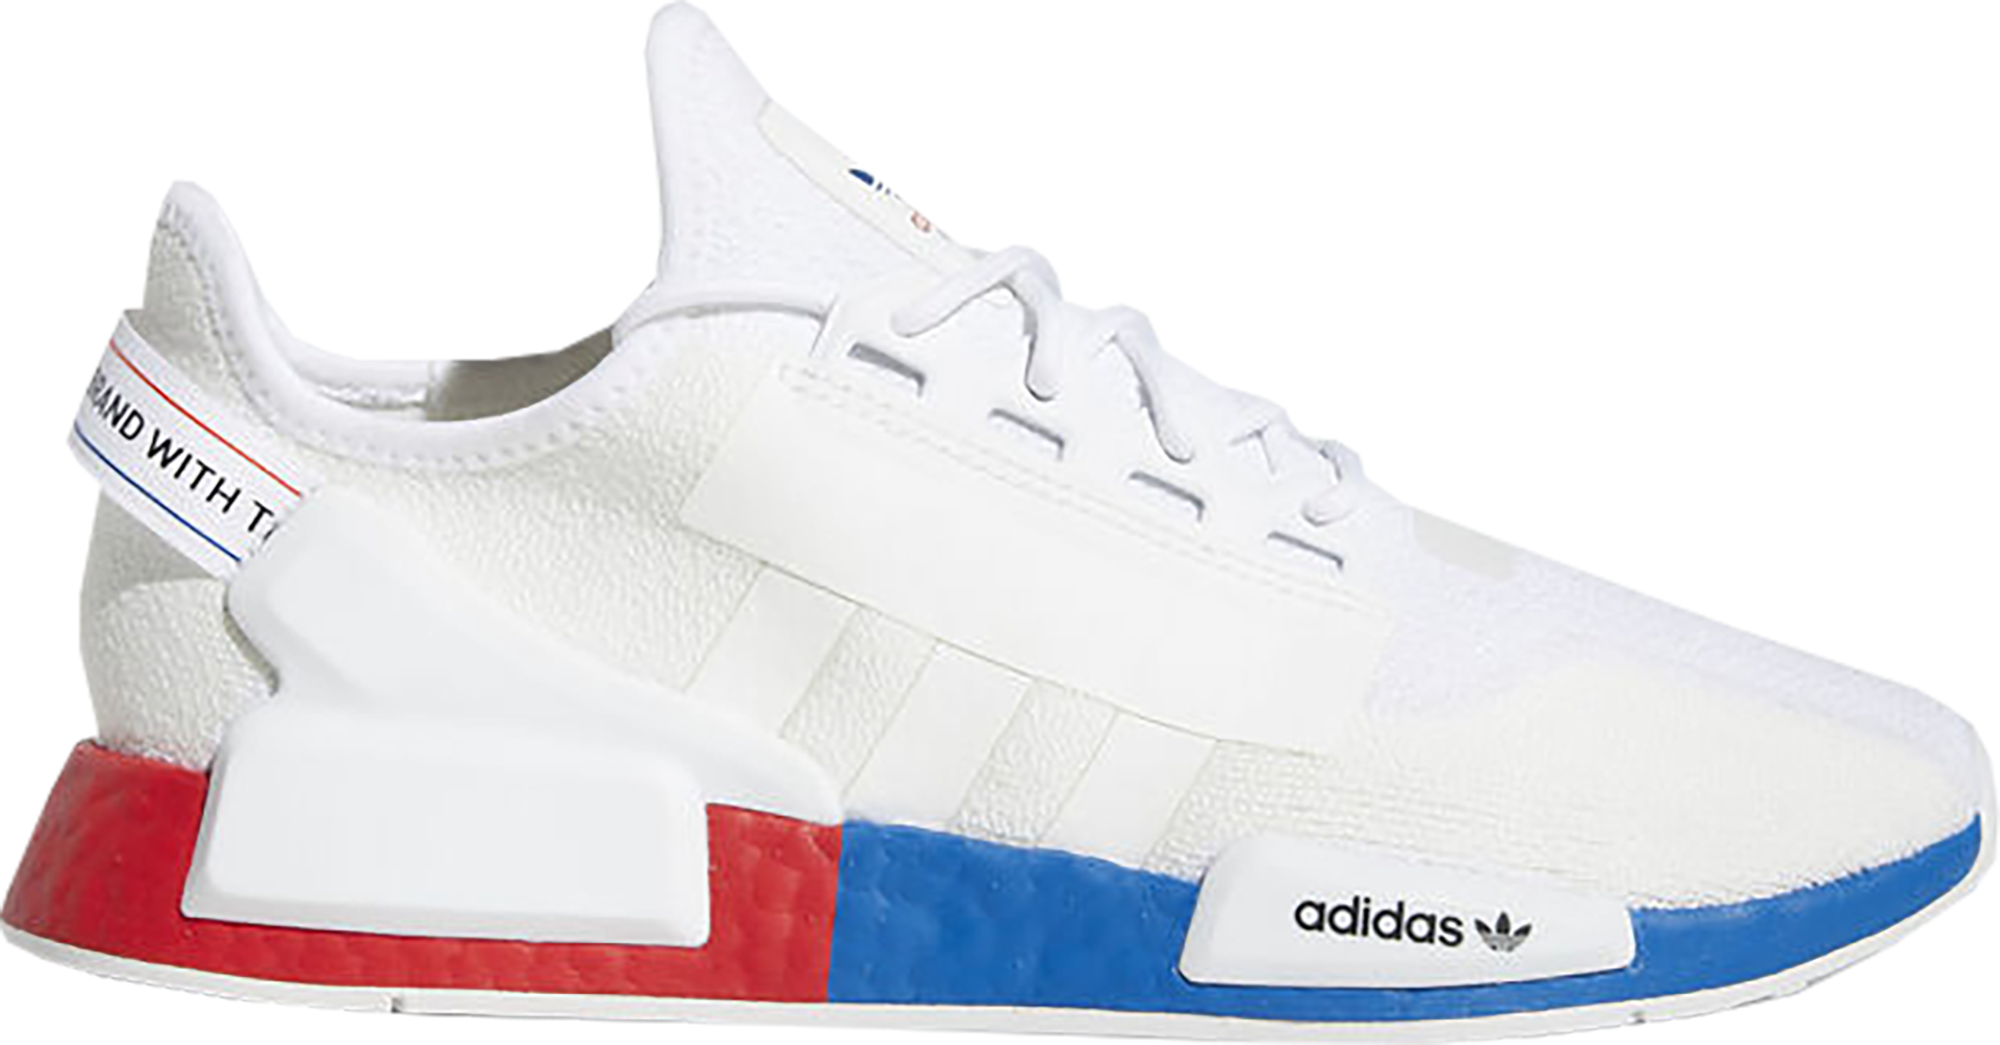 nmd r1 red blue white